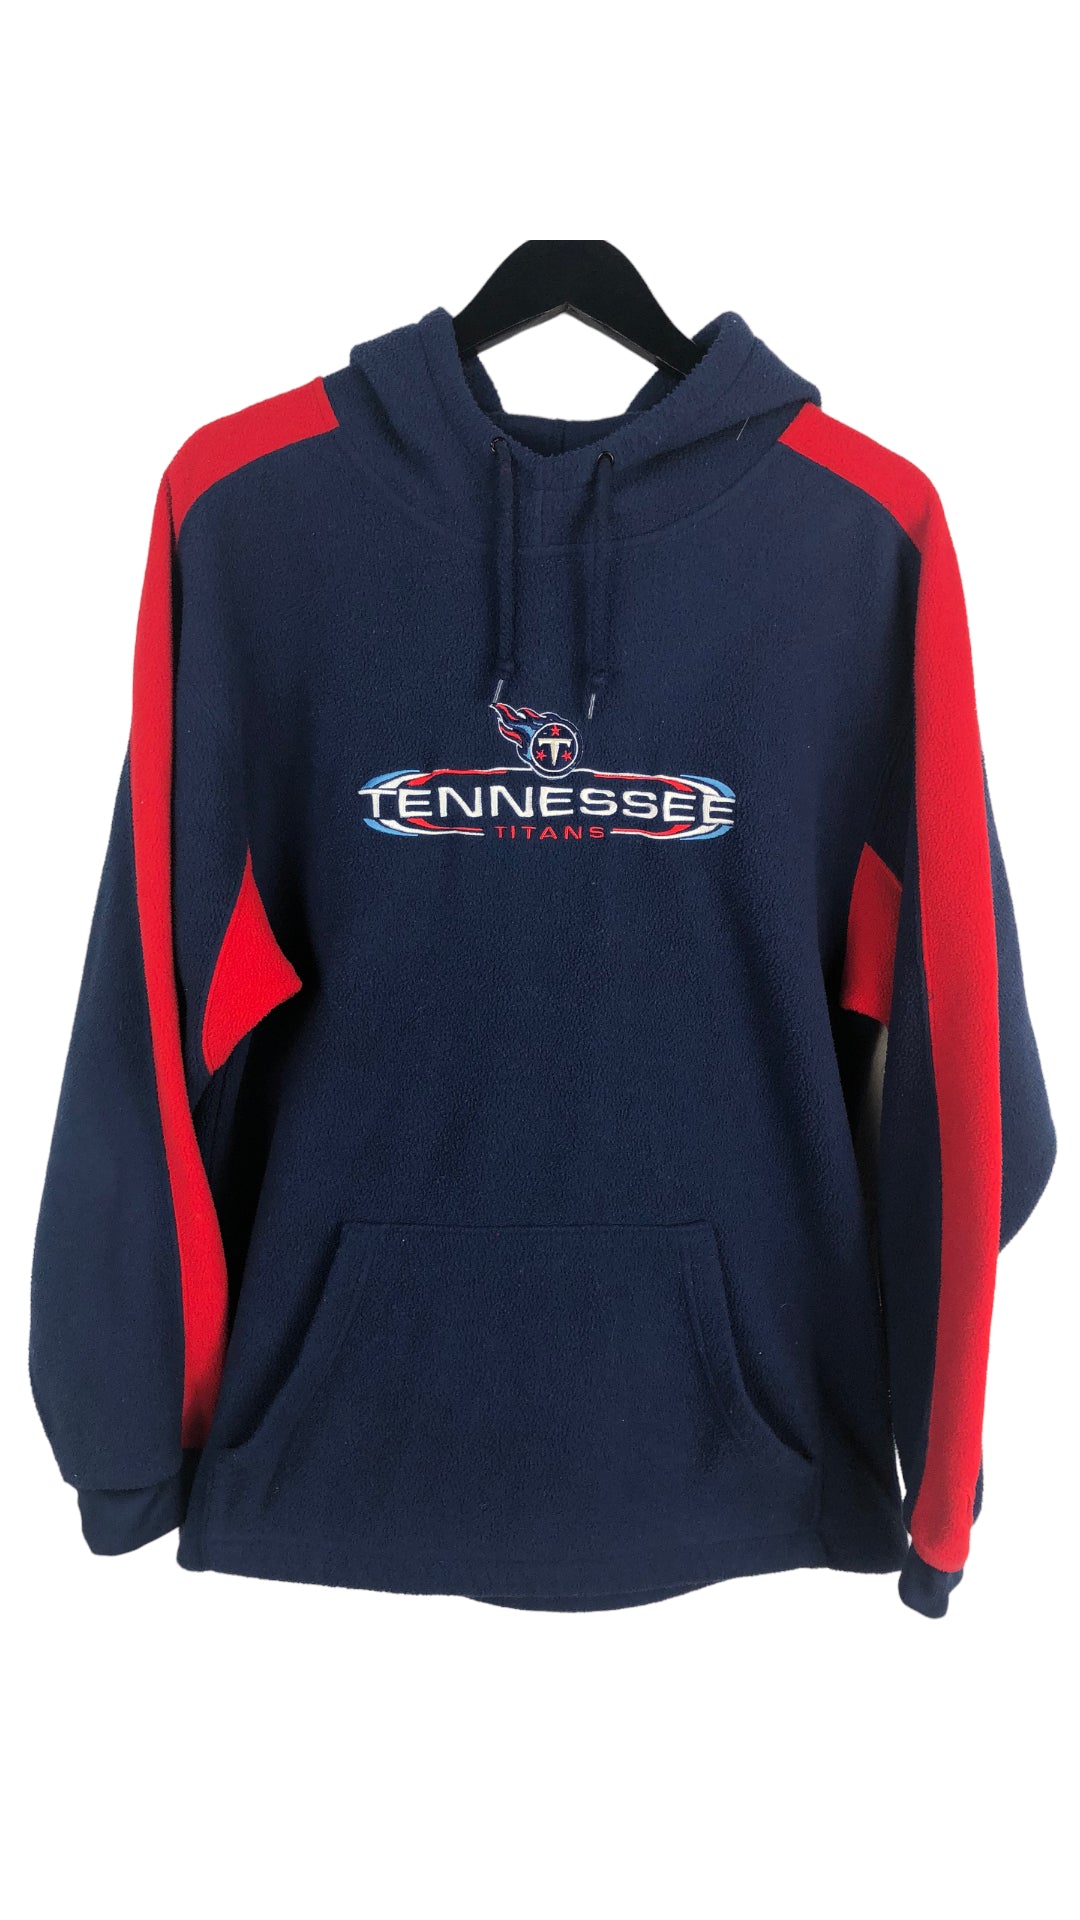 Load image into Gallery viewer, VTG Tennessee Titans Fleece Red and Blue Sweatshirt Sz L
